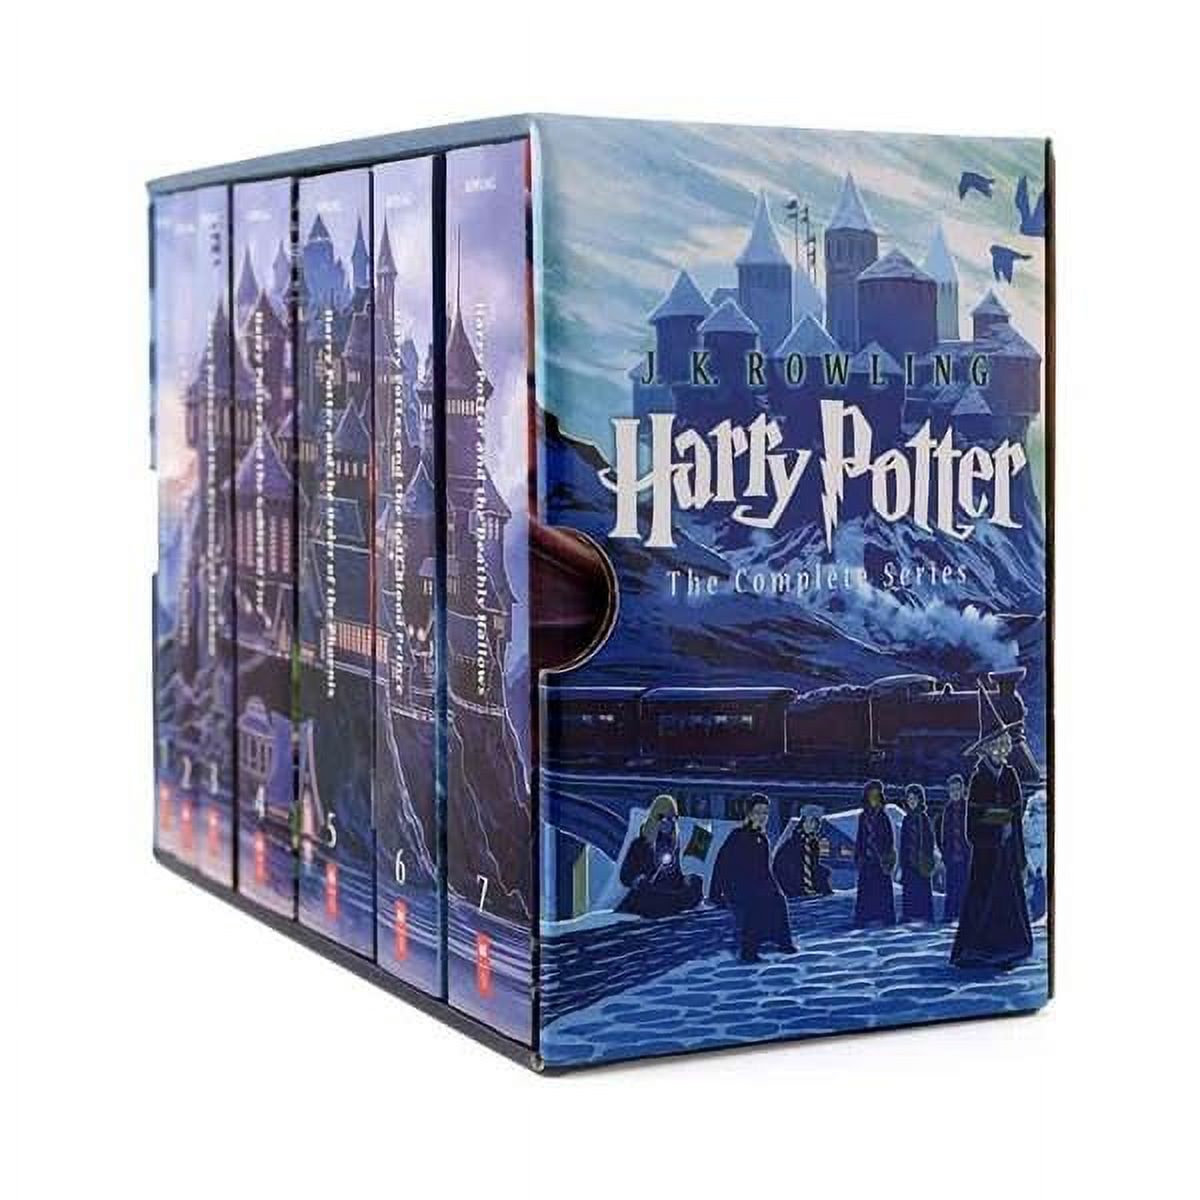 Harry Potter: Harry Potter Special Edition Paperback Boxed Set: Books 1-7 (Paperback) - image 2 of 4